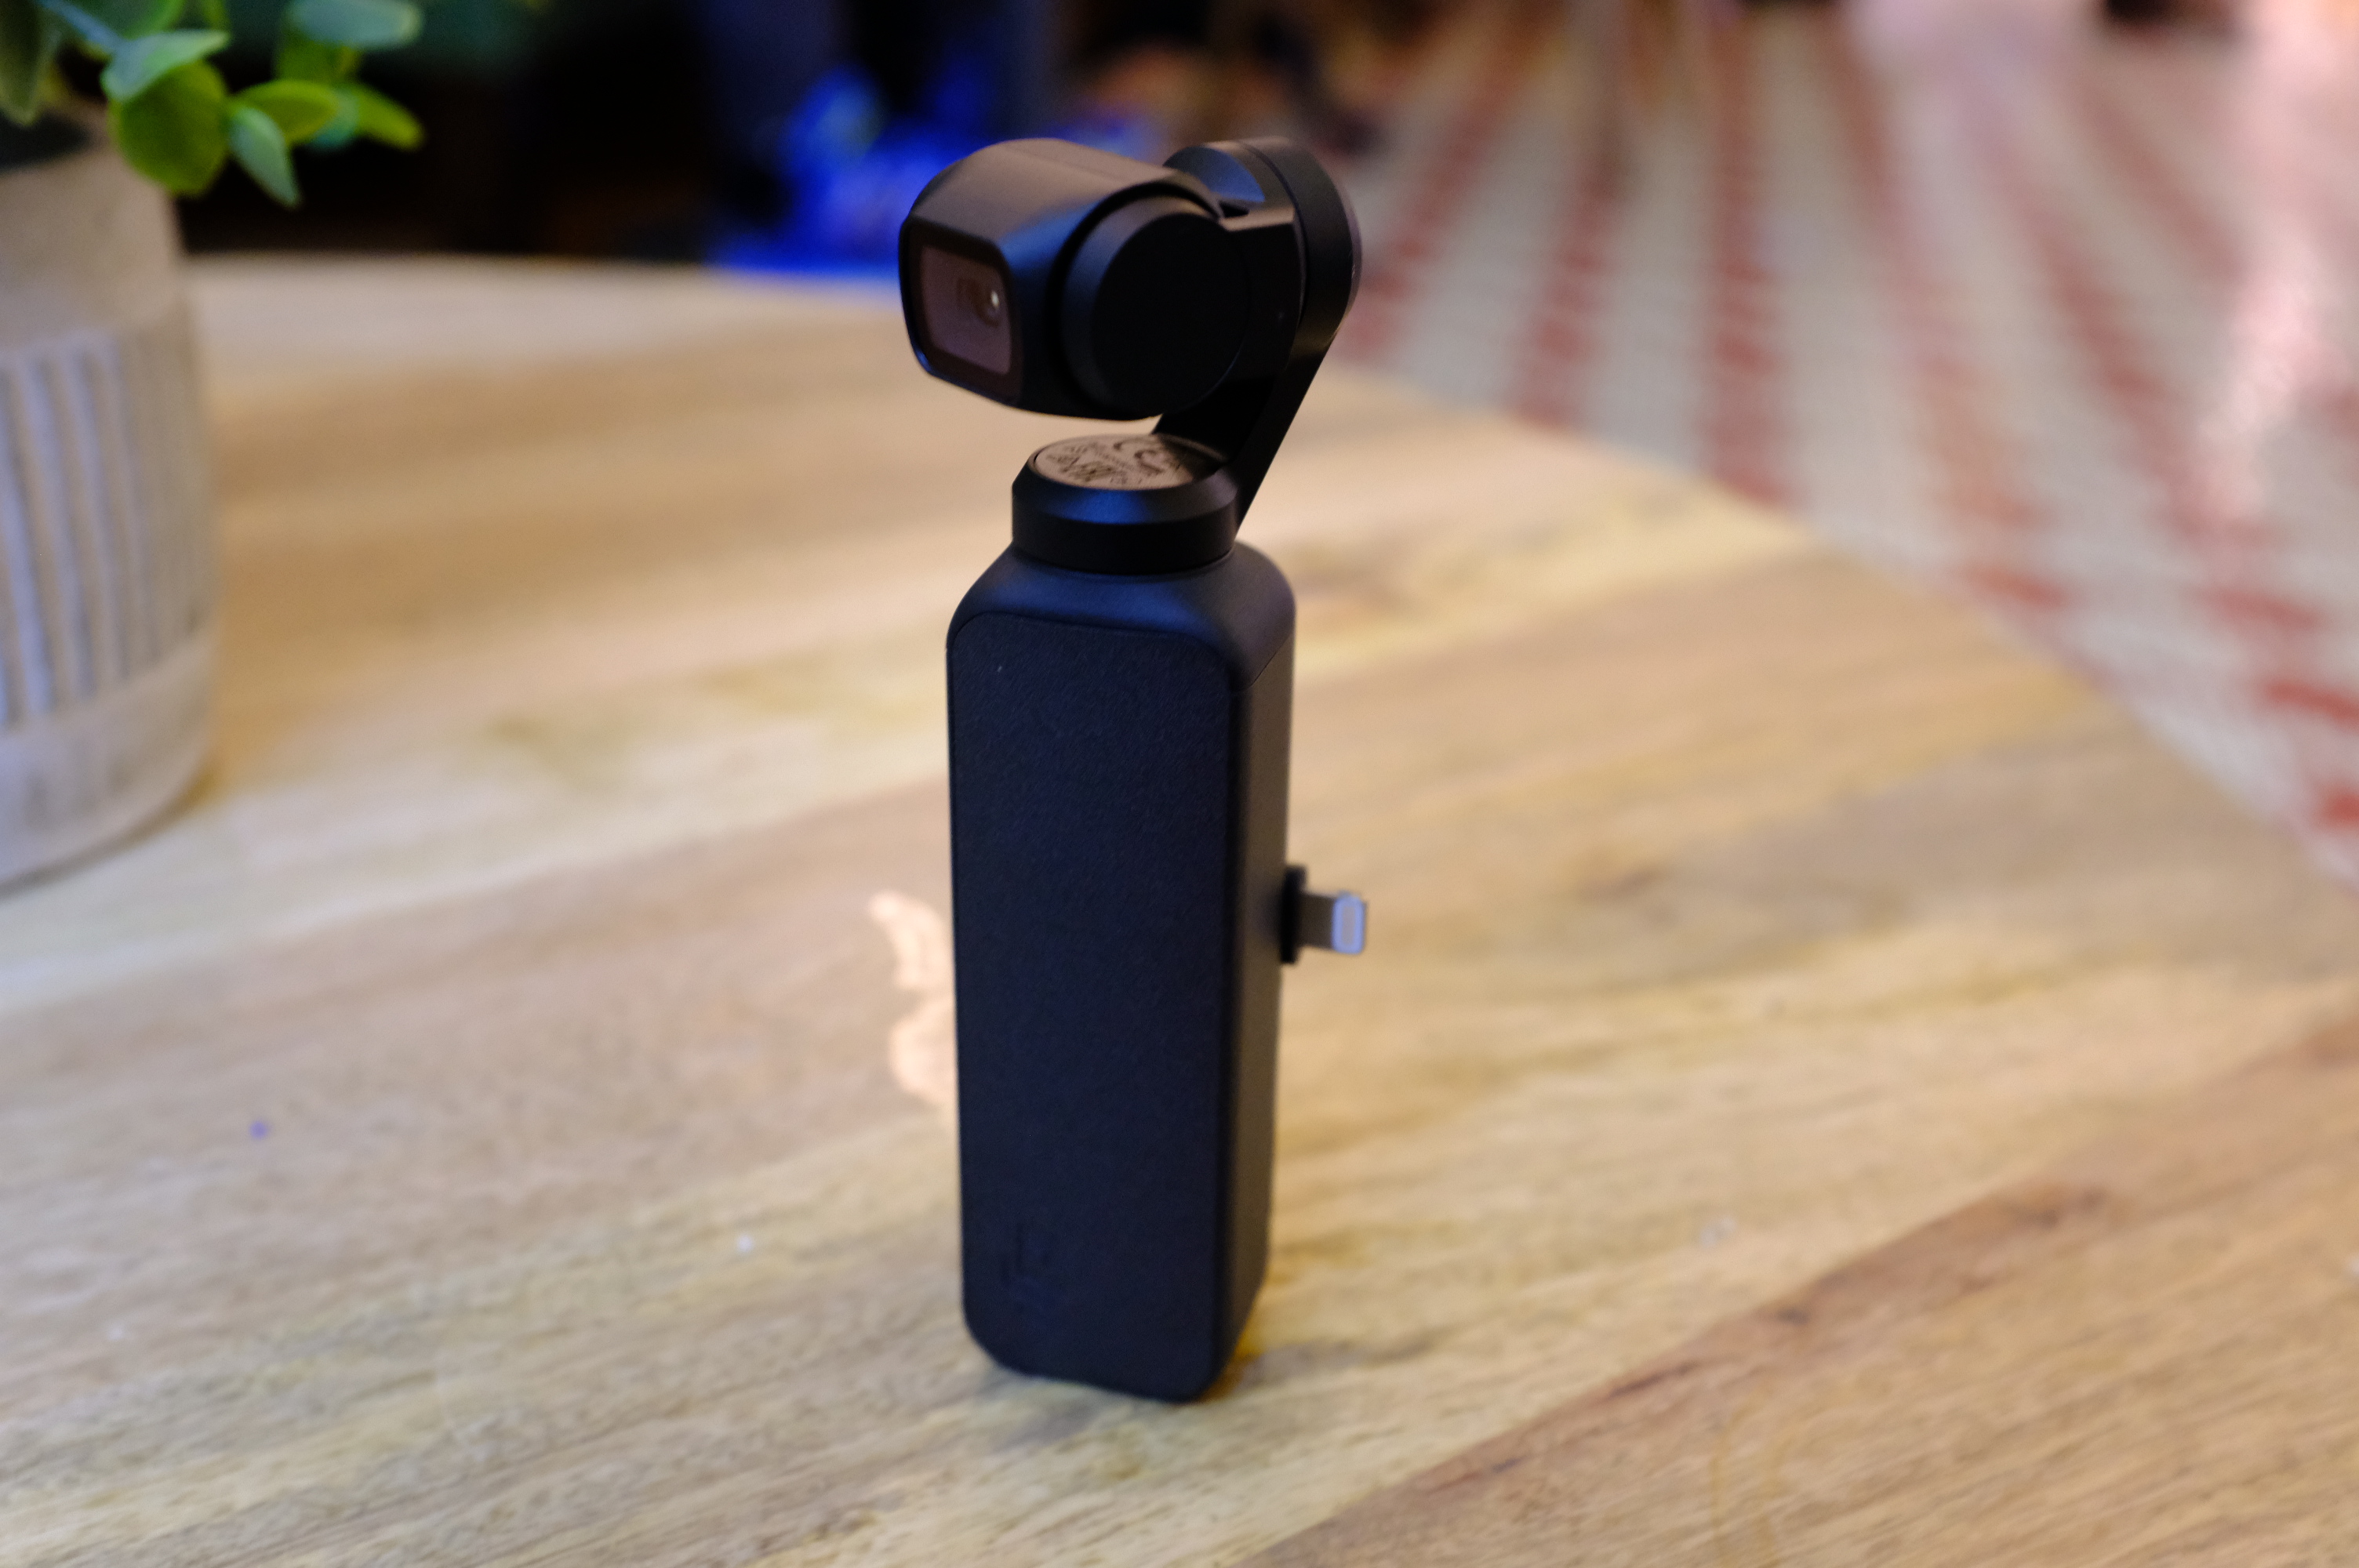 Up close and hands-on with DJI's Osmo Pocket gimbal | TechCrunch